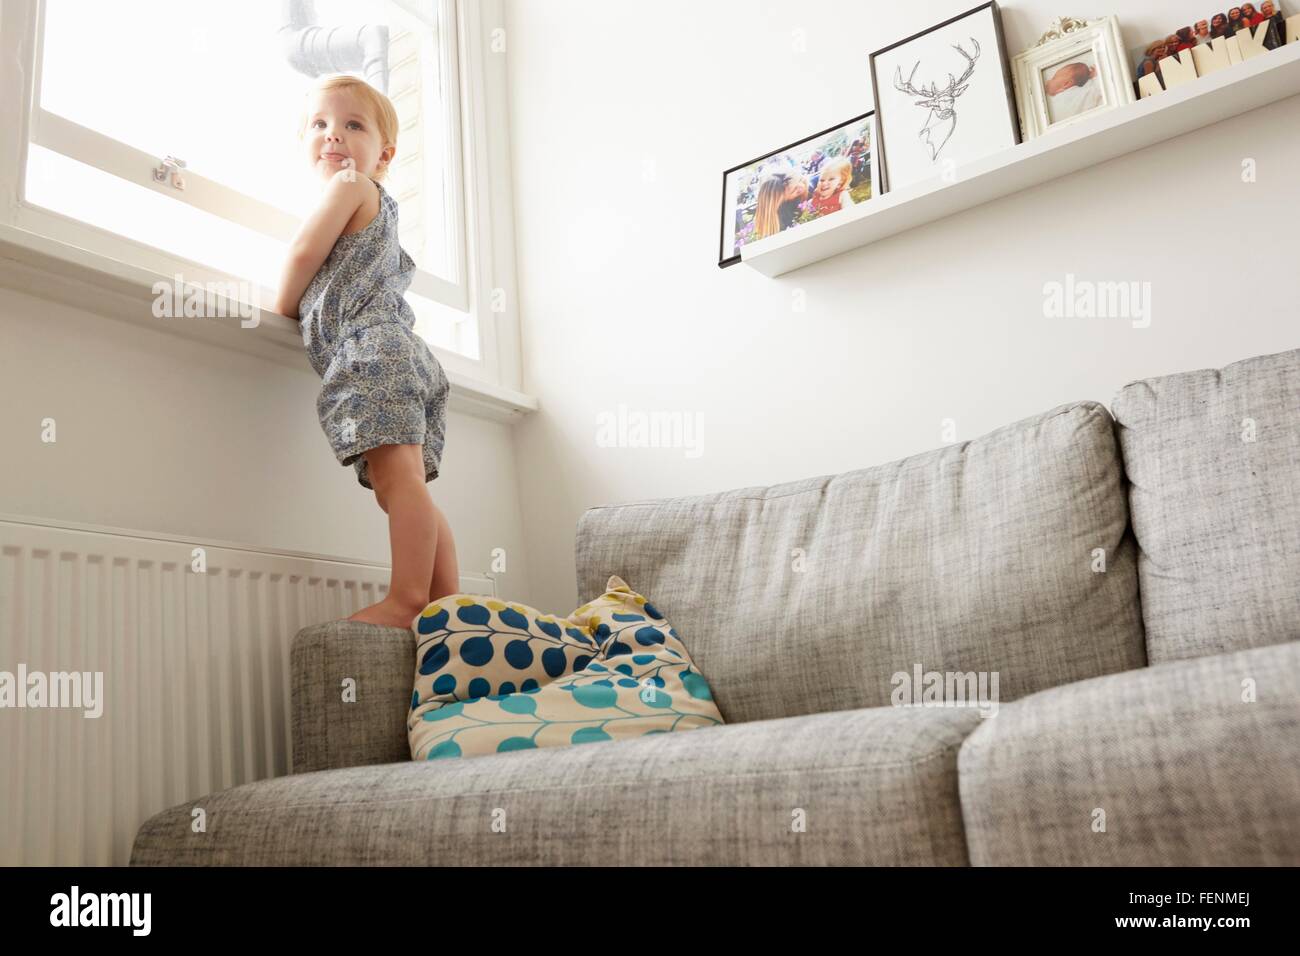 Low angle view of female toddler standing on sofa by window Stock Photo